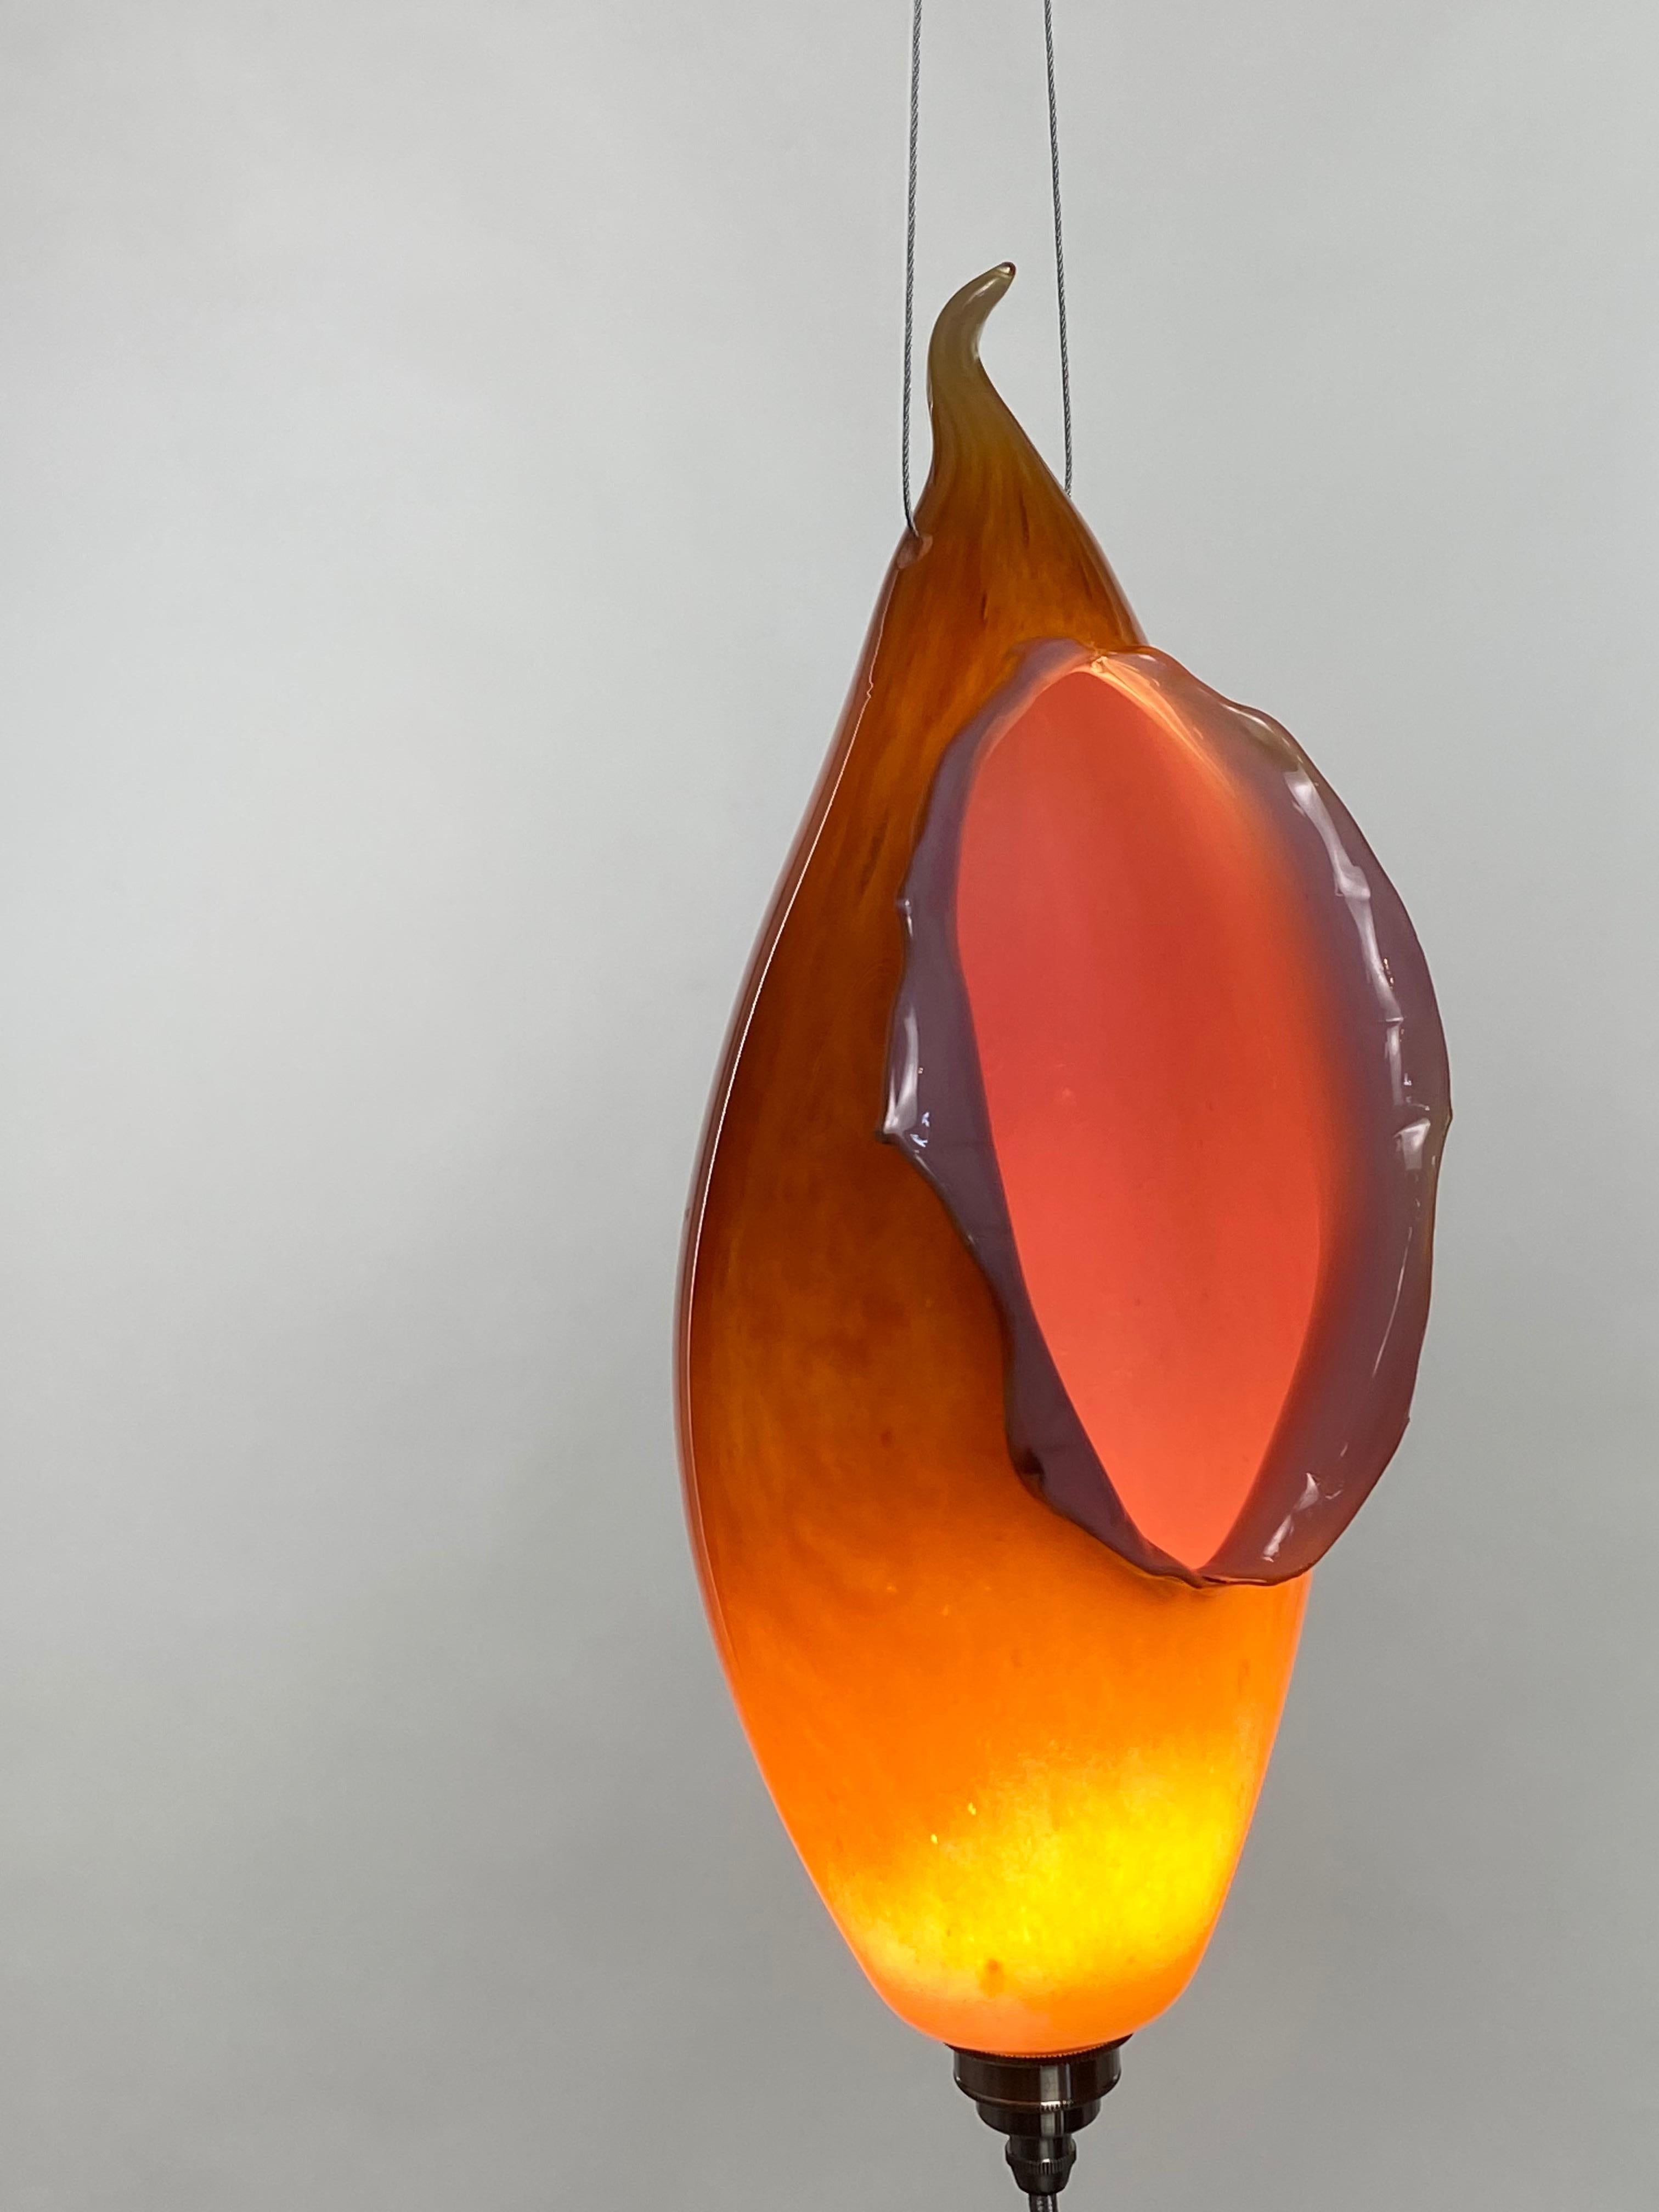 Blown Glass Pink and Orange Lamp Pendent Light, 21st Century by Mattia Biagi For Sale 4